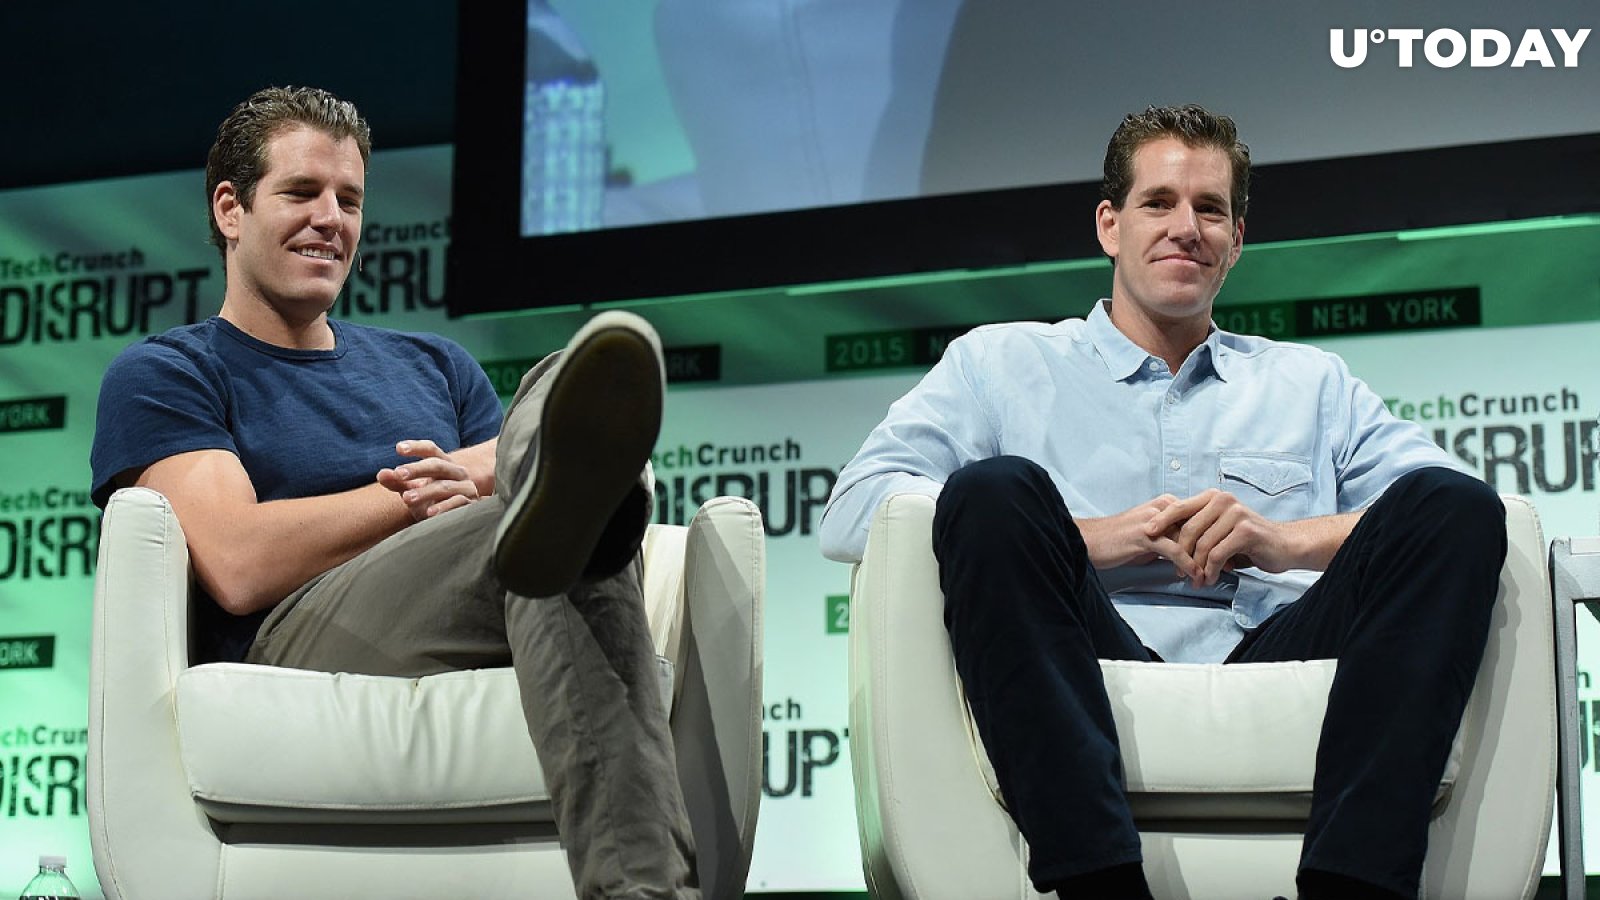 Former Warner Bros. Executive to Film Movie About Winklevoss Twins